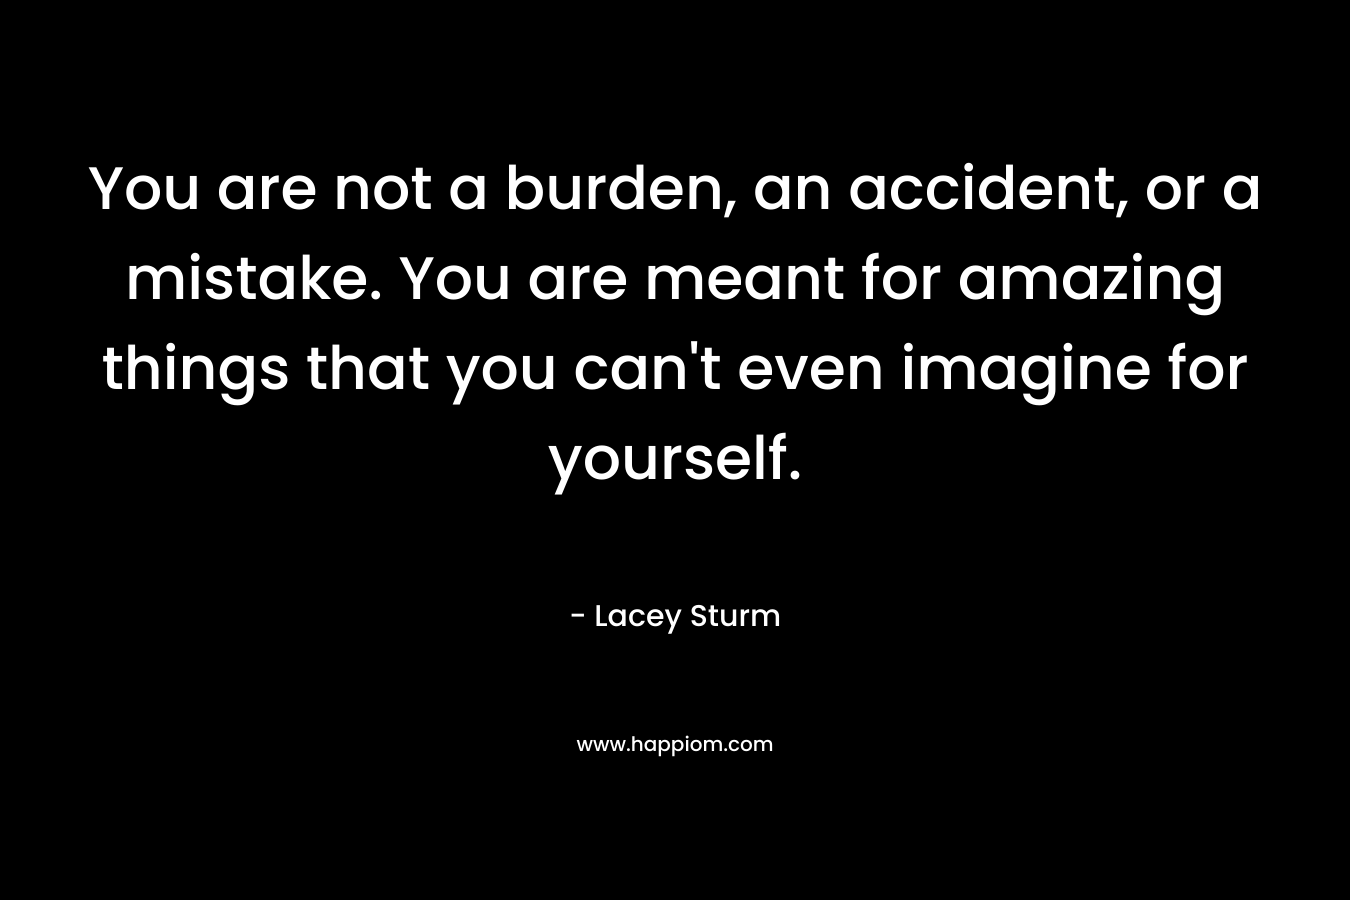 You are not a burden, an accident, or a mistake. You are meant for amazing things that you can't even imagine for yourself.